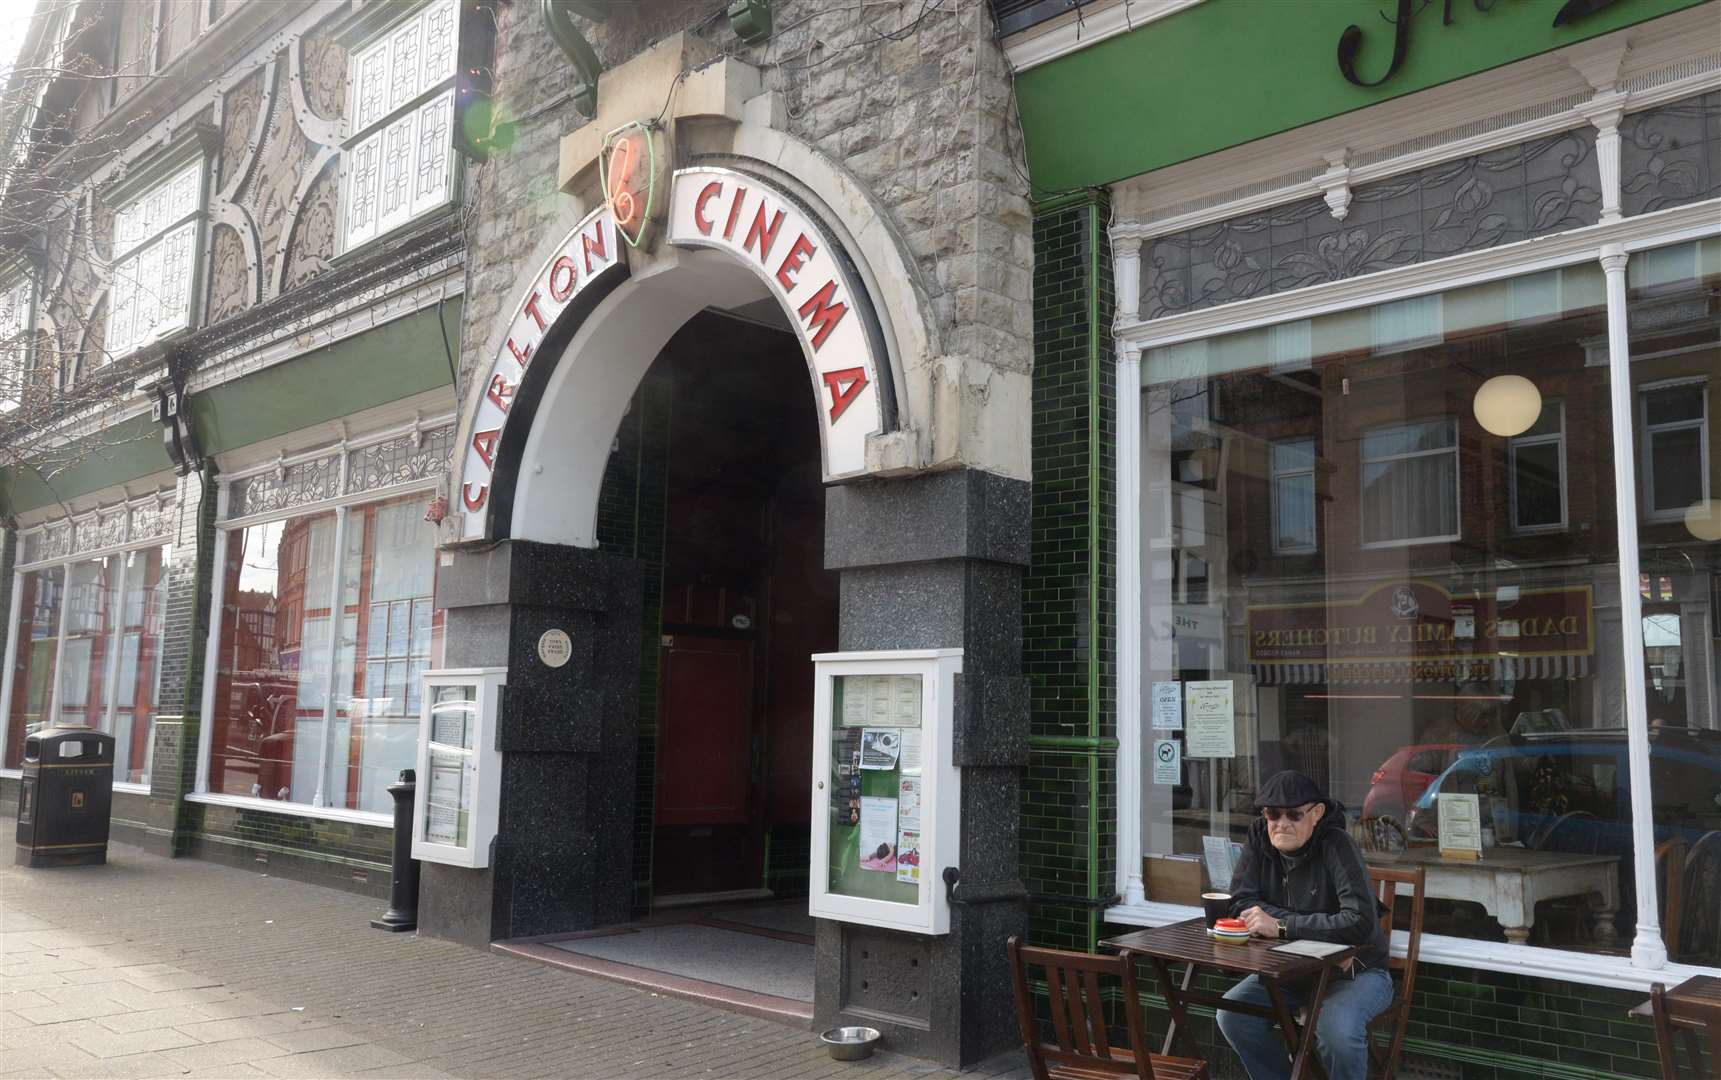 The response to The Carlton Cinema in Westgate's price rise has been positive.